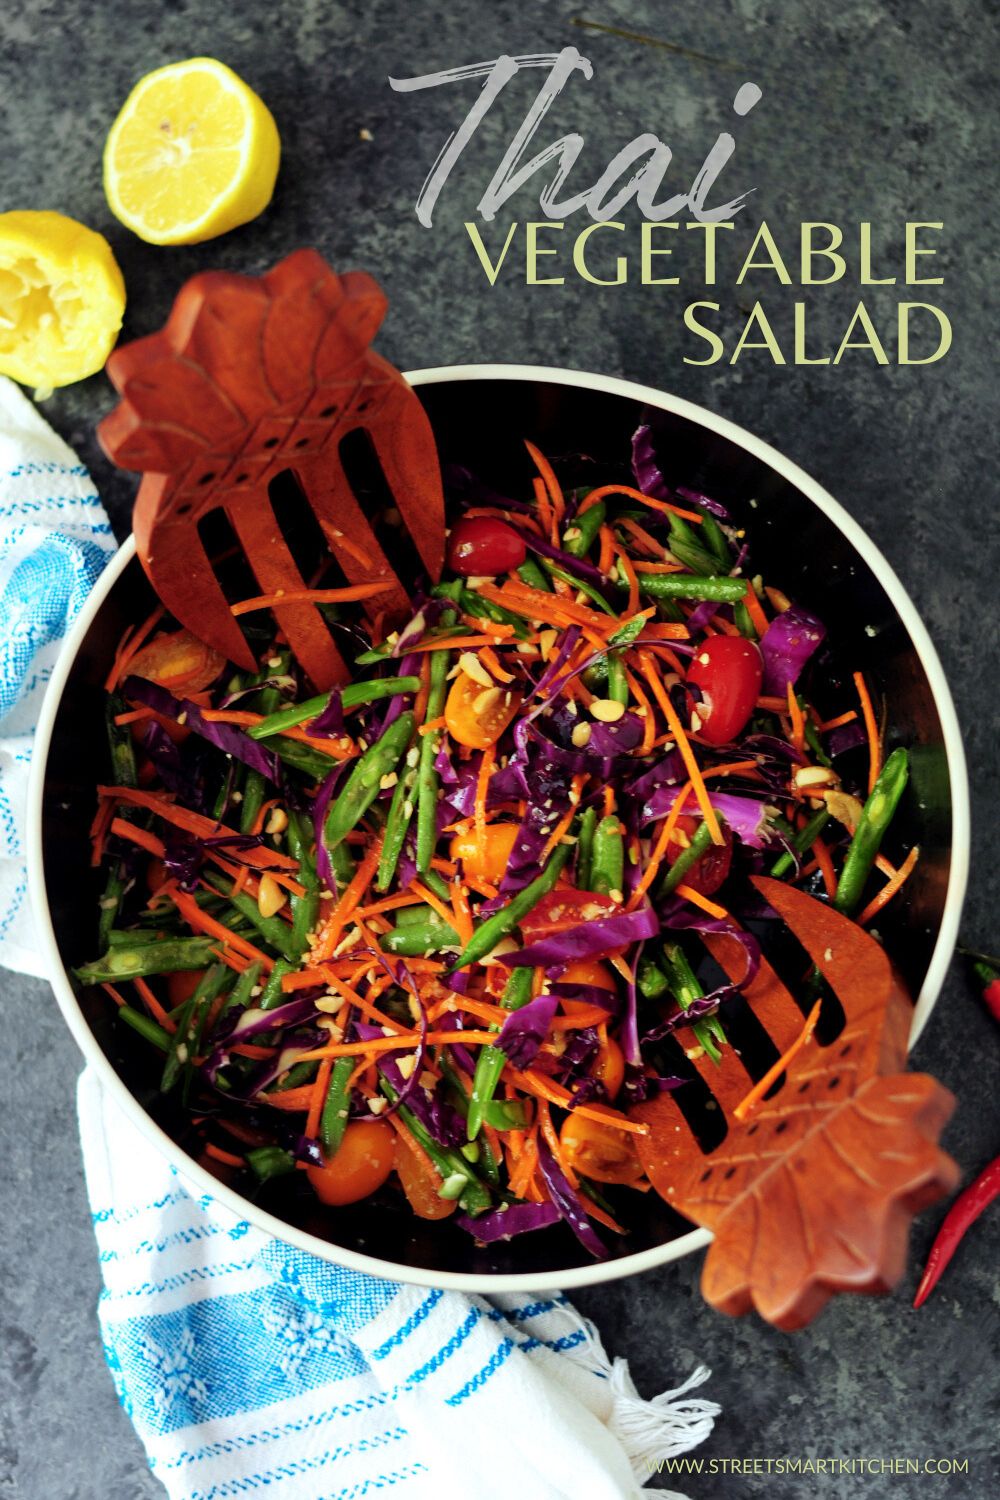 This simple Thai vegetable salad features an authentic Thai flavor with a gentle kick. It’s also gluten-free and vegan.